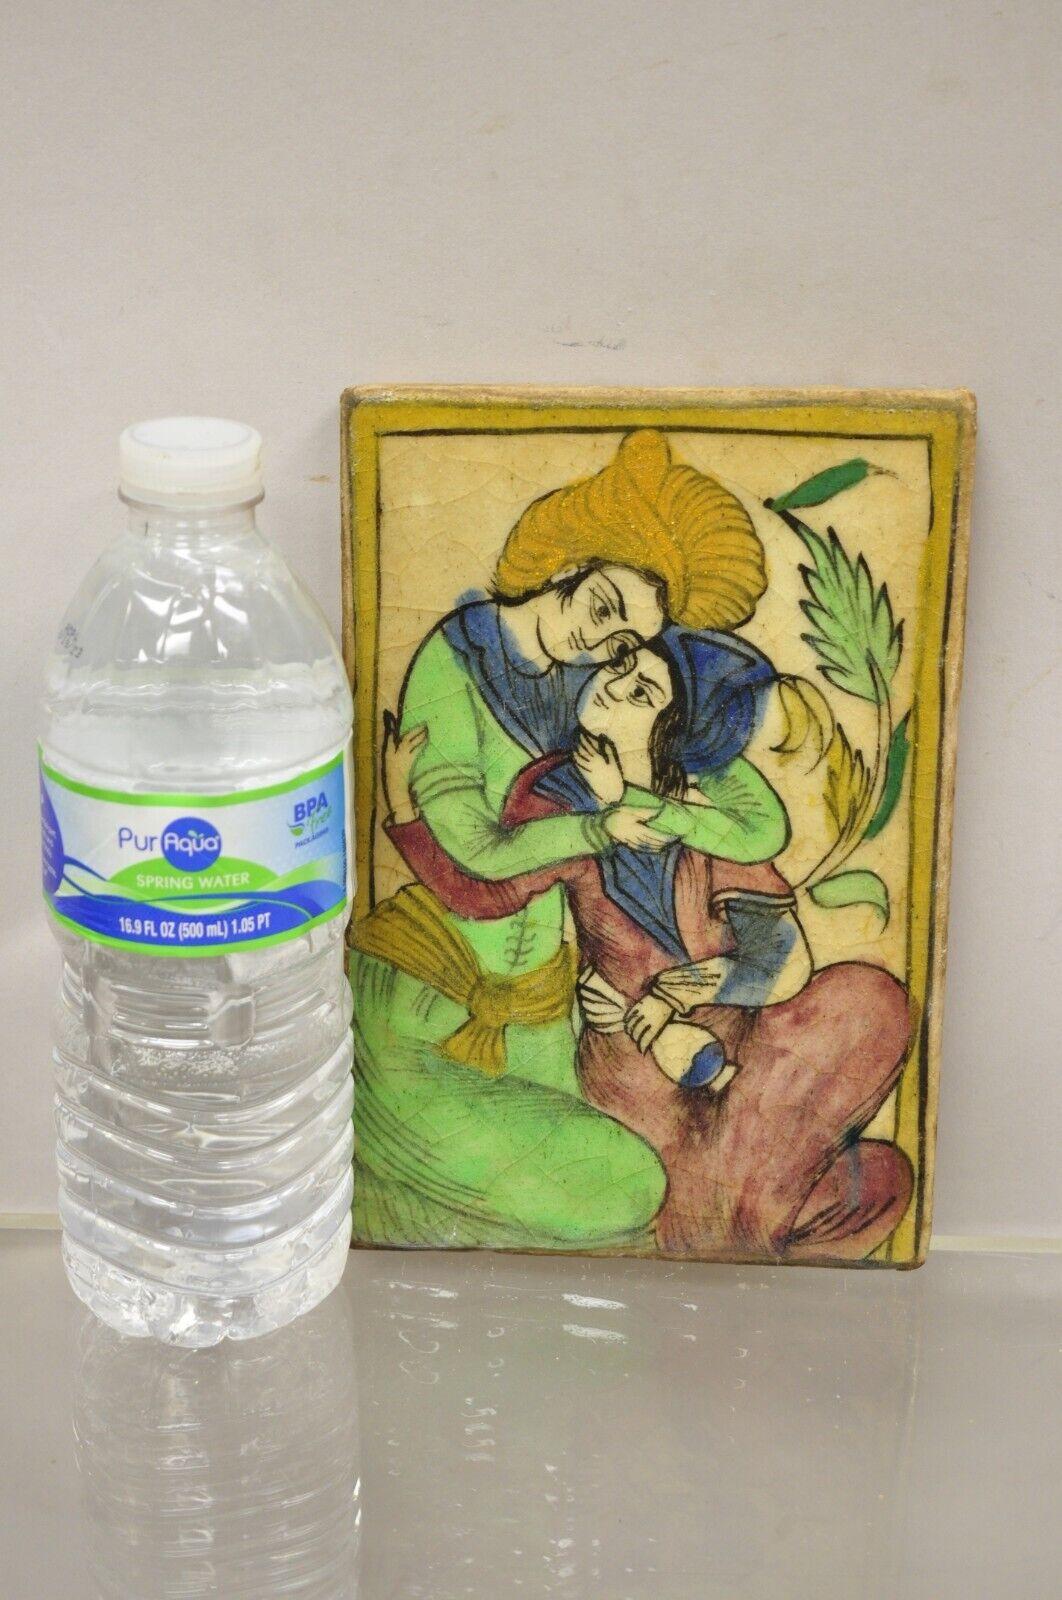 Antique Persian Iznik Qajar style green ceramic pottery tile loving couple C5. Item features original crackle glazed finish, heavy ceramic pottery construction, very impressive detail, wonderful style and form. Great to mount as wall art or accent